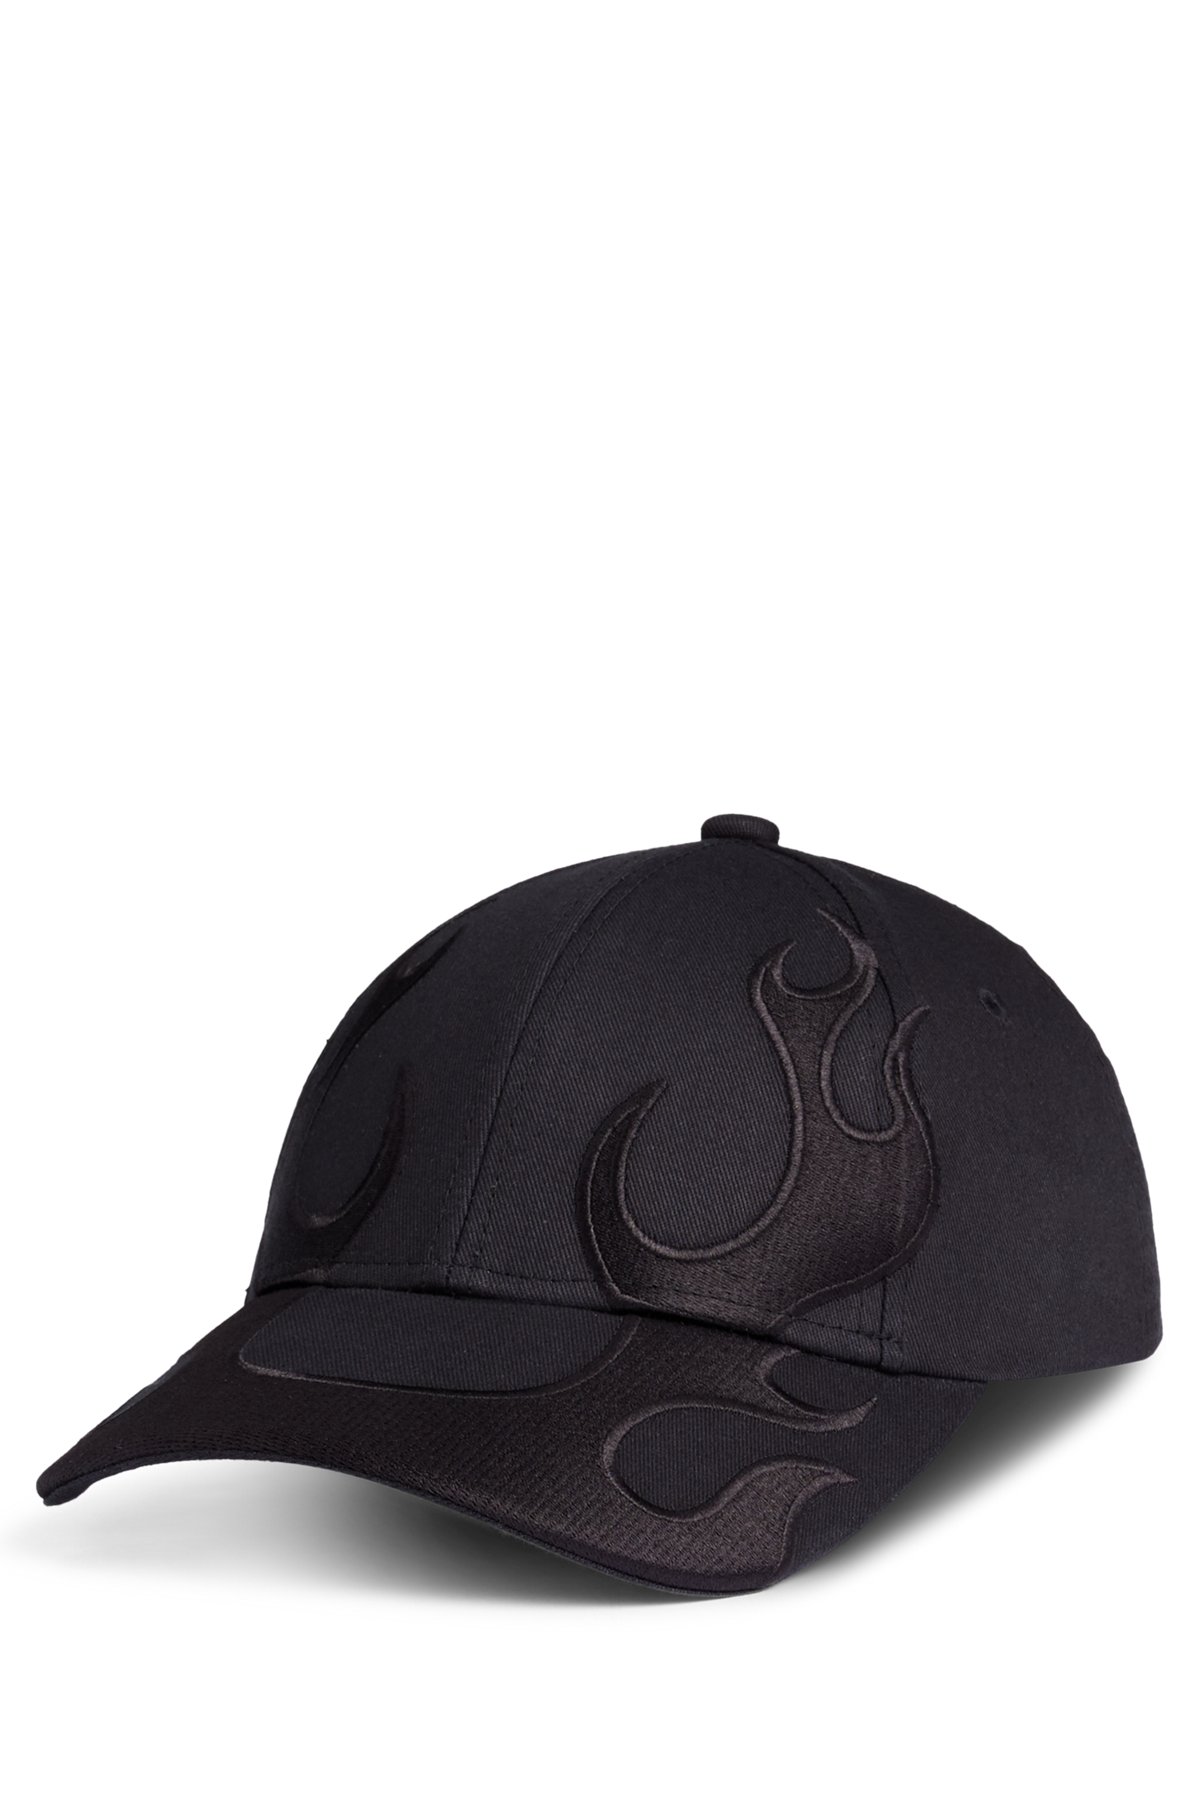 HUGO - Flame-embroidered cap in cotton twill